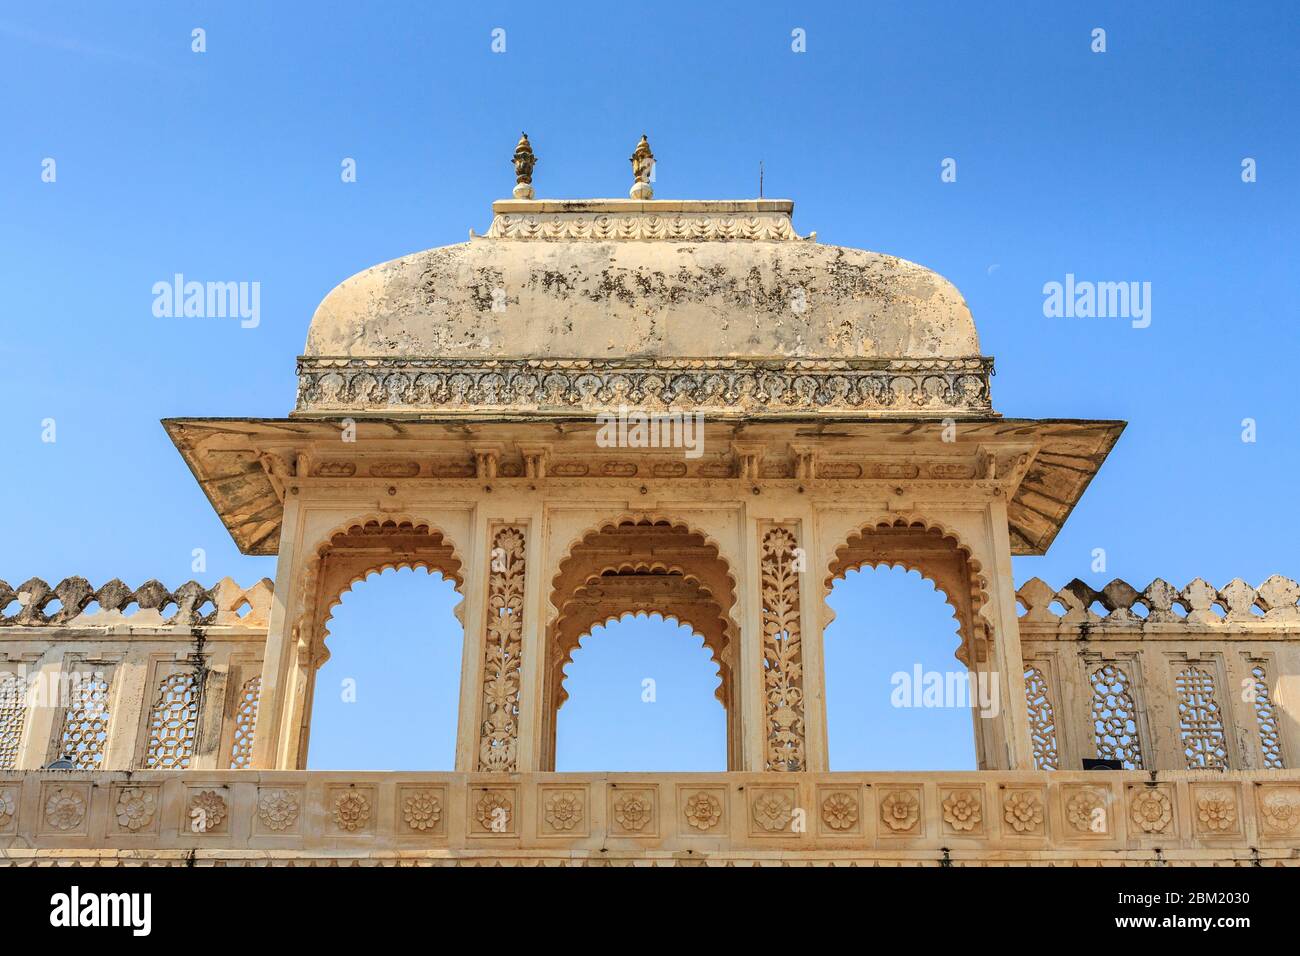 Mughal architecture of one of the decorated balconies of the City Palace at Udaipur, India Stock Photo